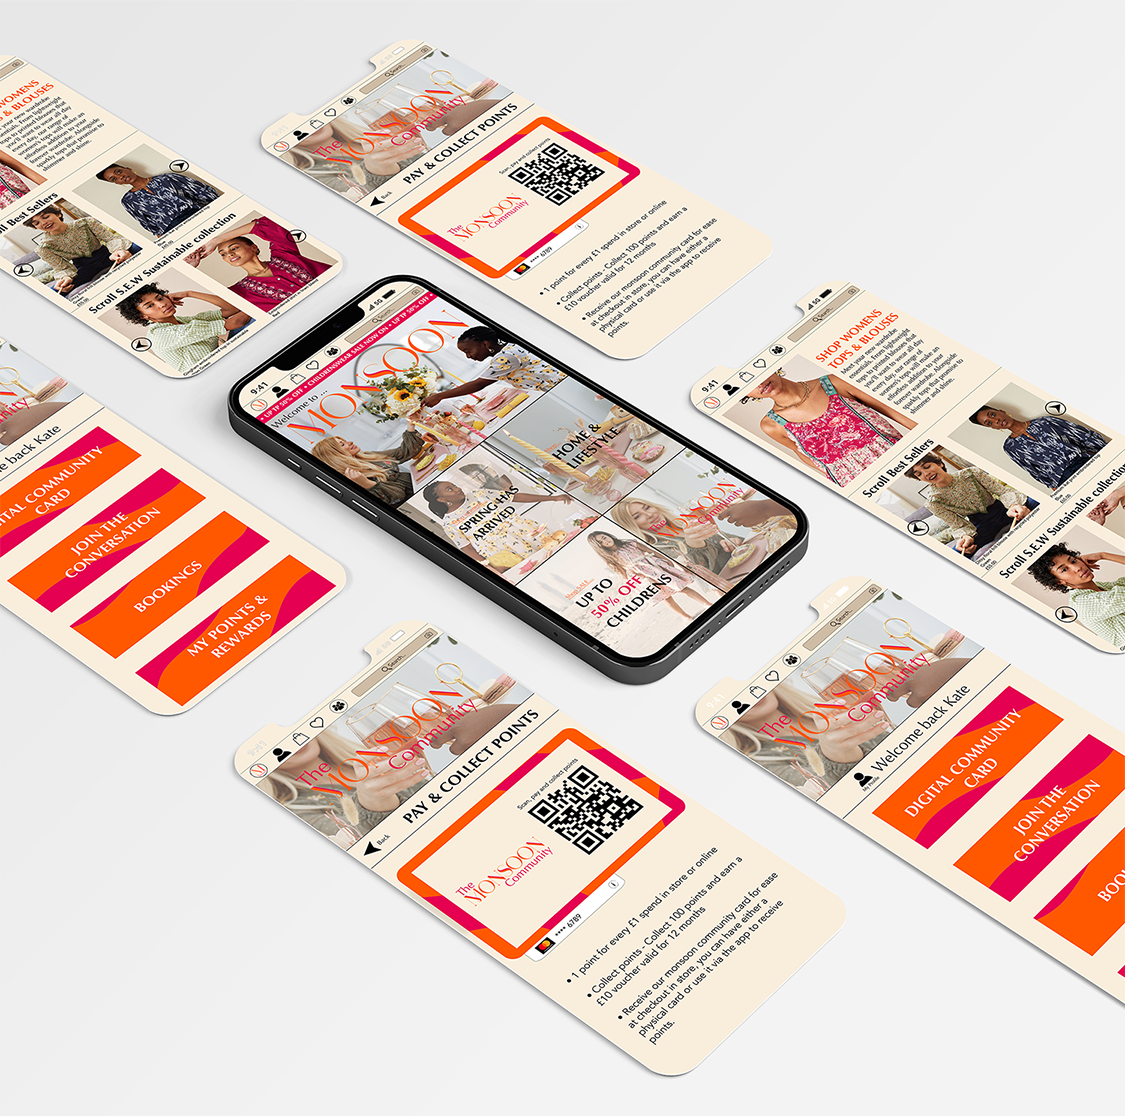 App mock-up by Kate Heil showing the launch of a Monsoon app designed in the new branding style, with features to enhance the consumer shopping experience in-store and online.